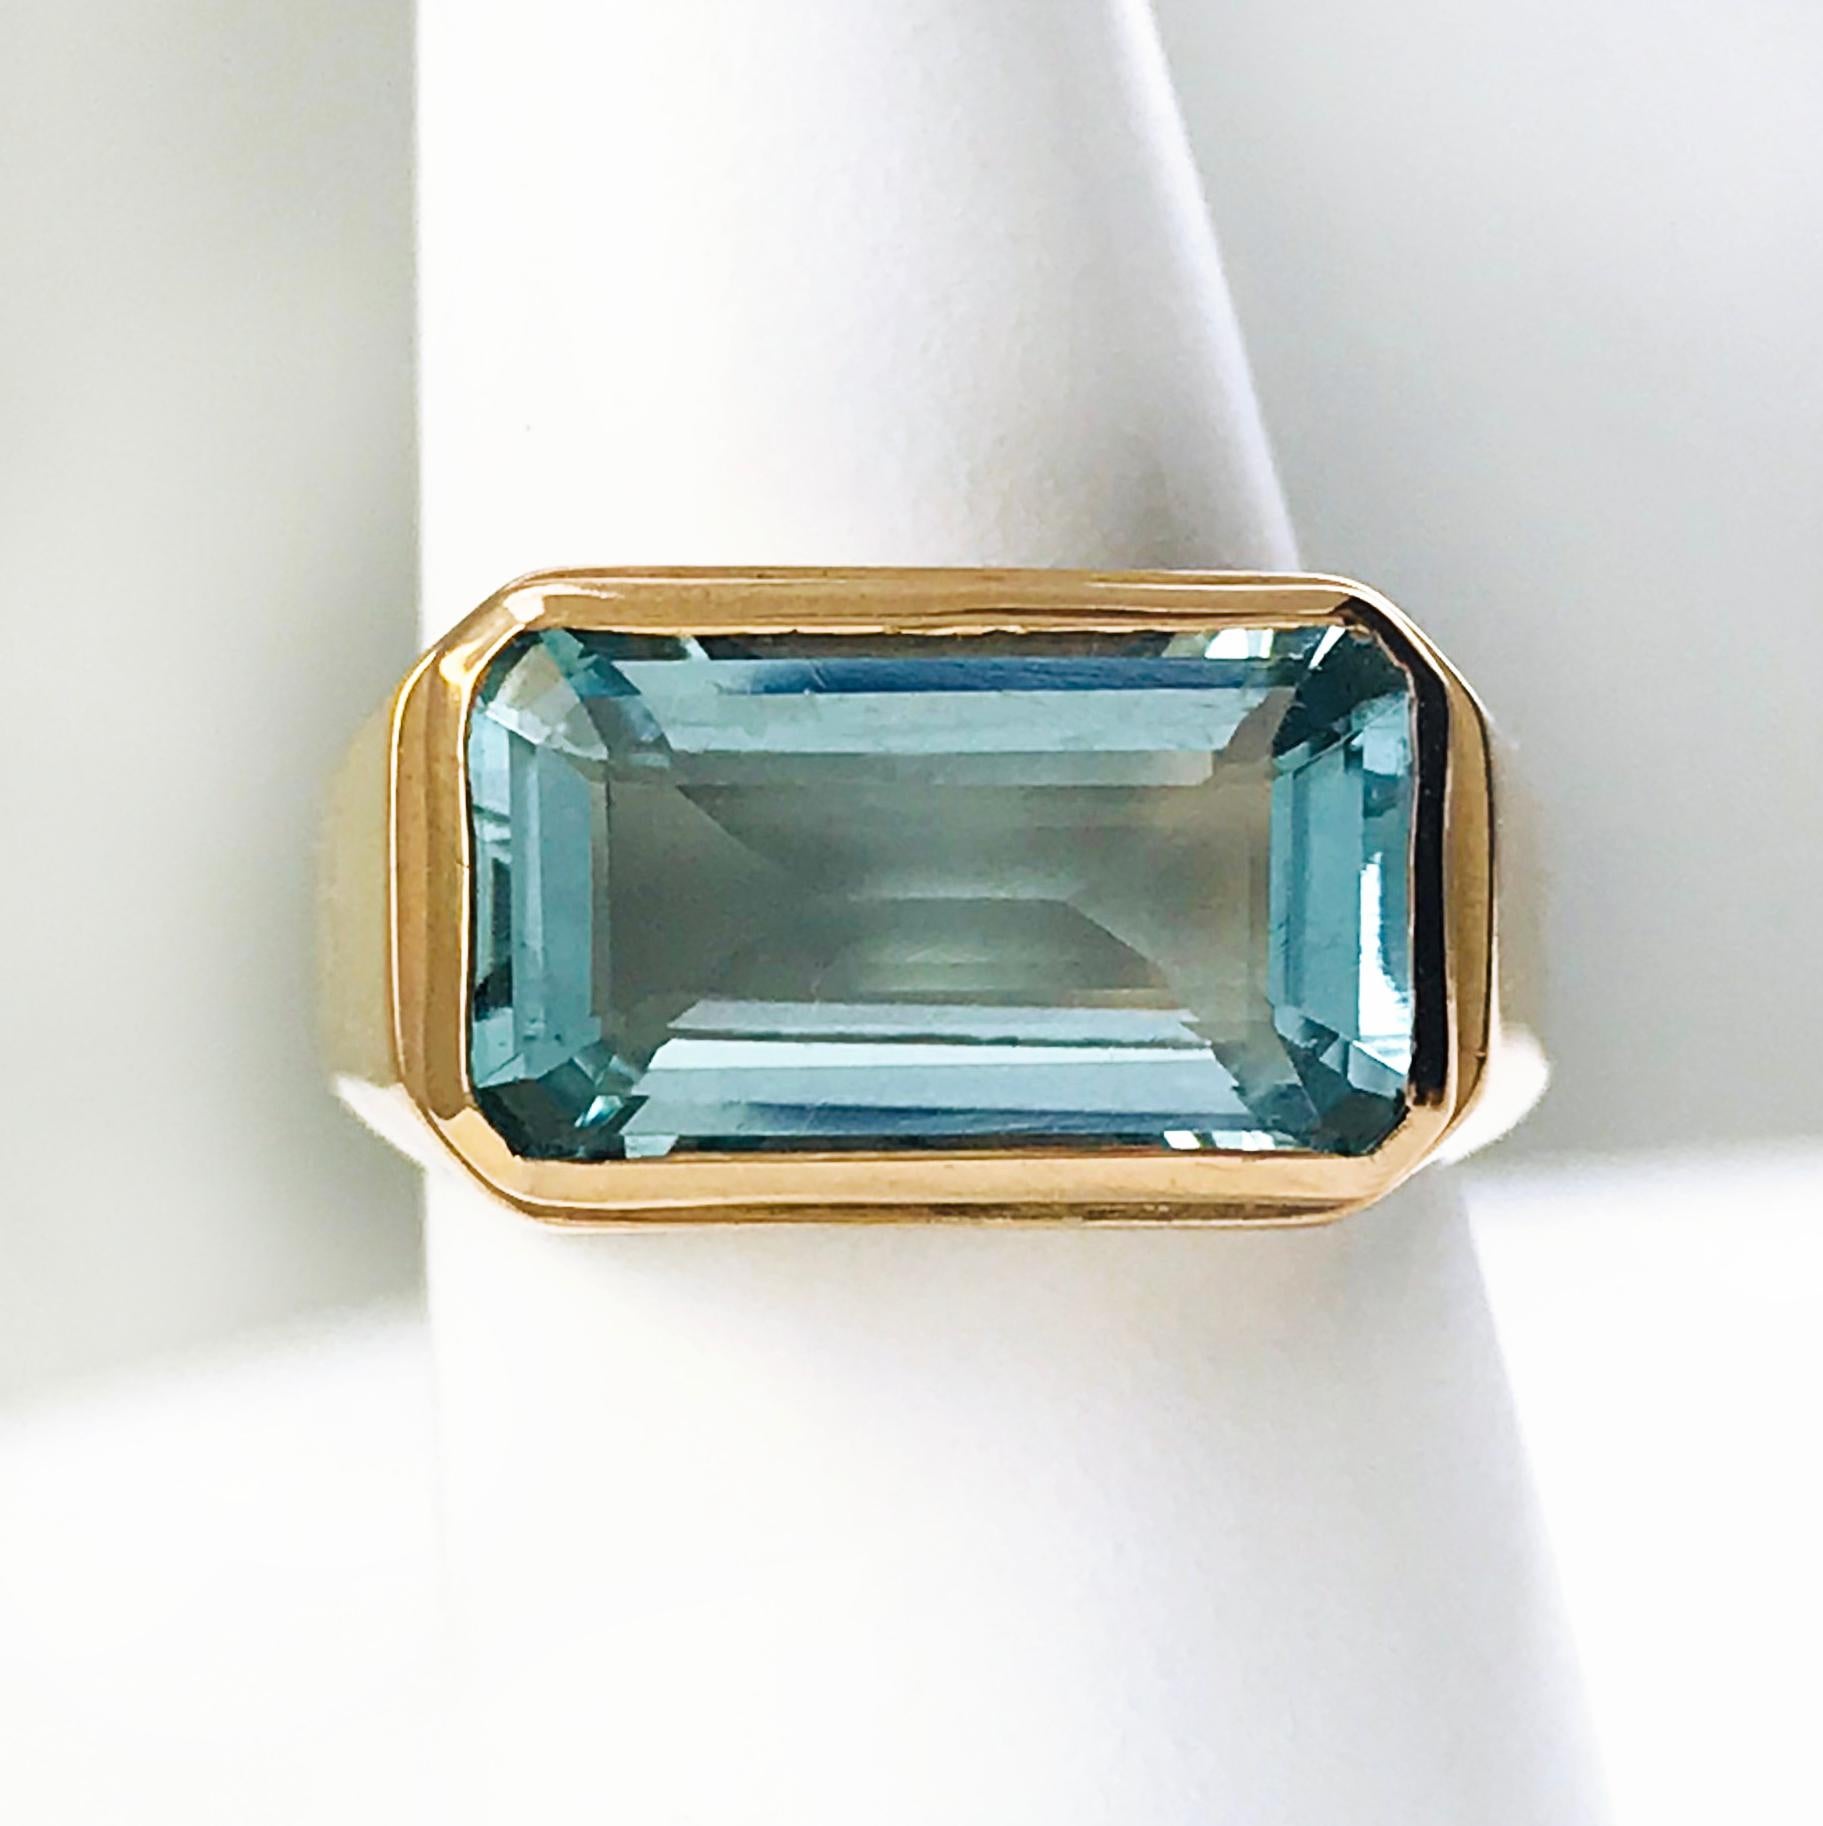 18 Karat Rose Gold Emerald-Cut Aquamarine ring. The ring design is simple, yet sleek and impactful, the total carat weight of the aquamarine is 7.5ct. The thick band starts near the bezel then tapers at the bottom of the ring. Engraved on the inside